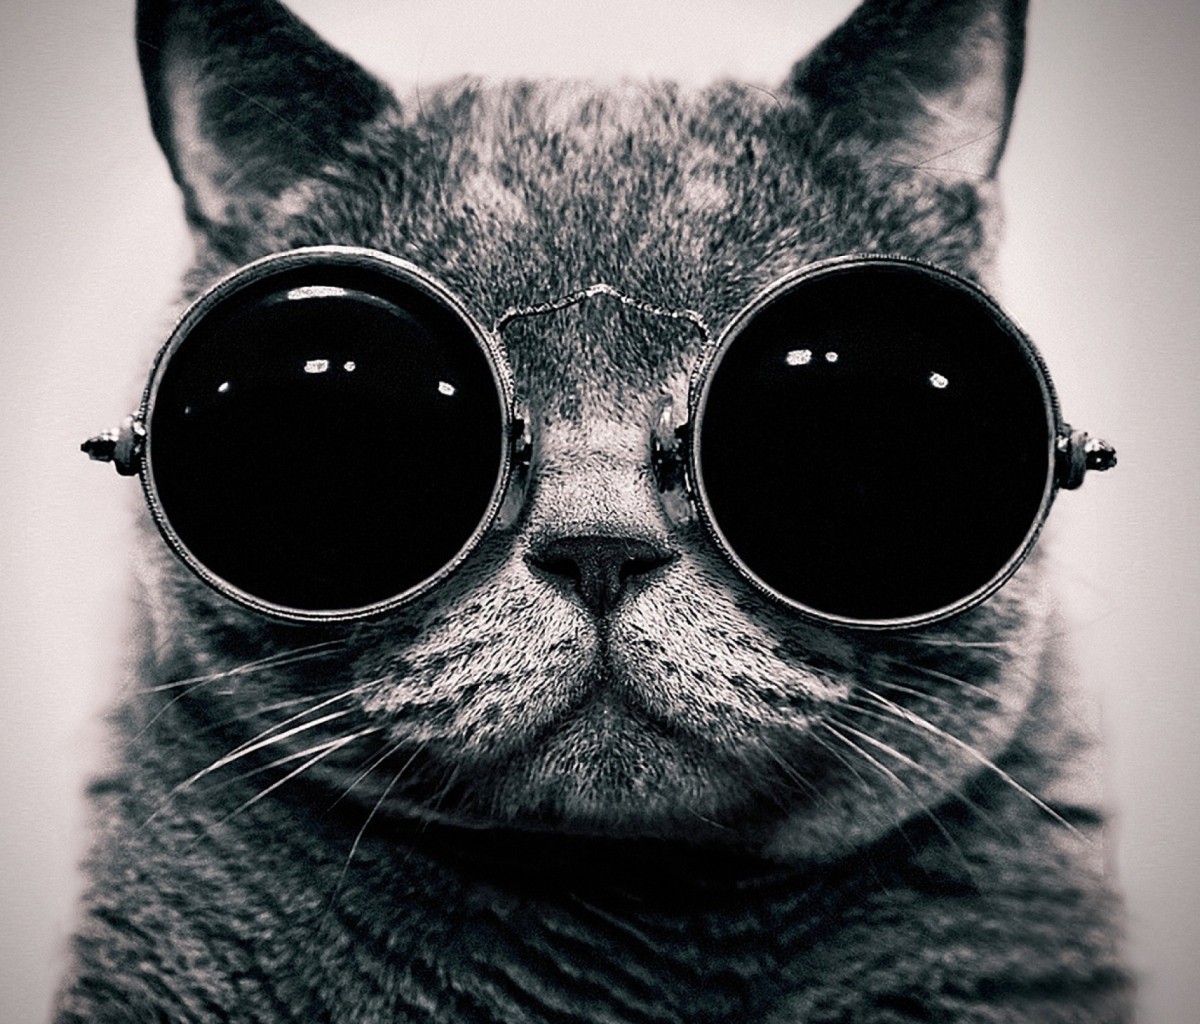 Cat With Glasses wallpaper 1200x1024